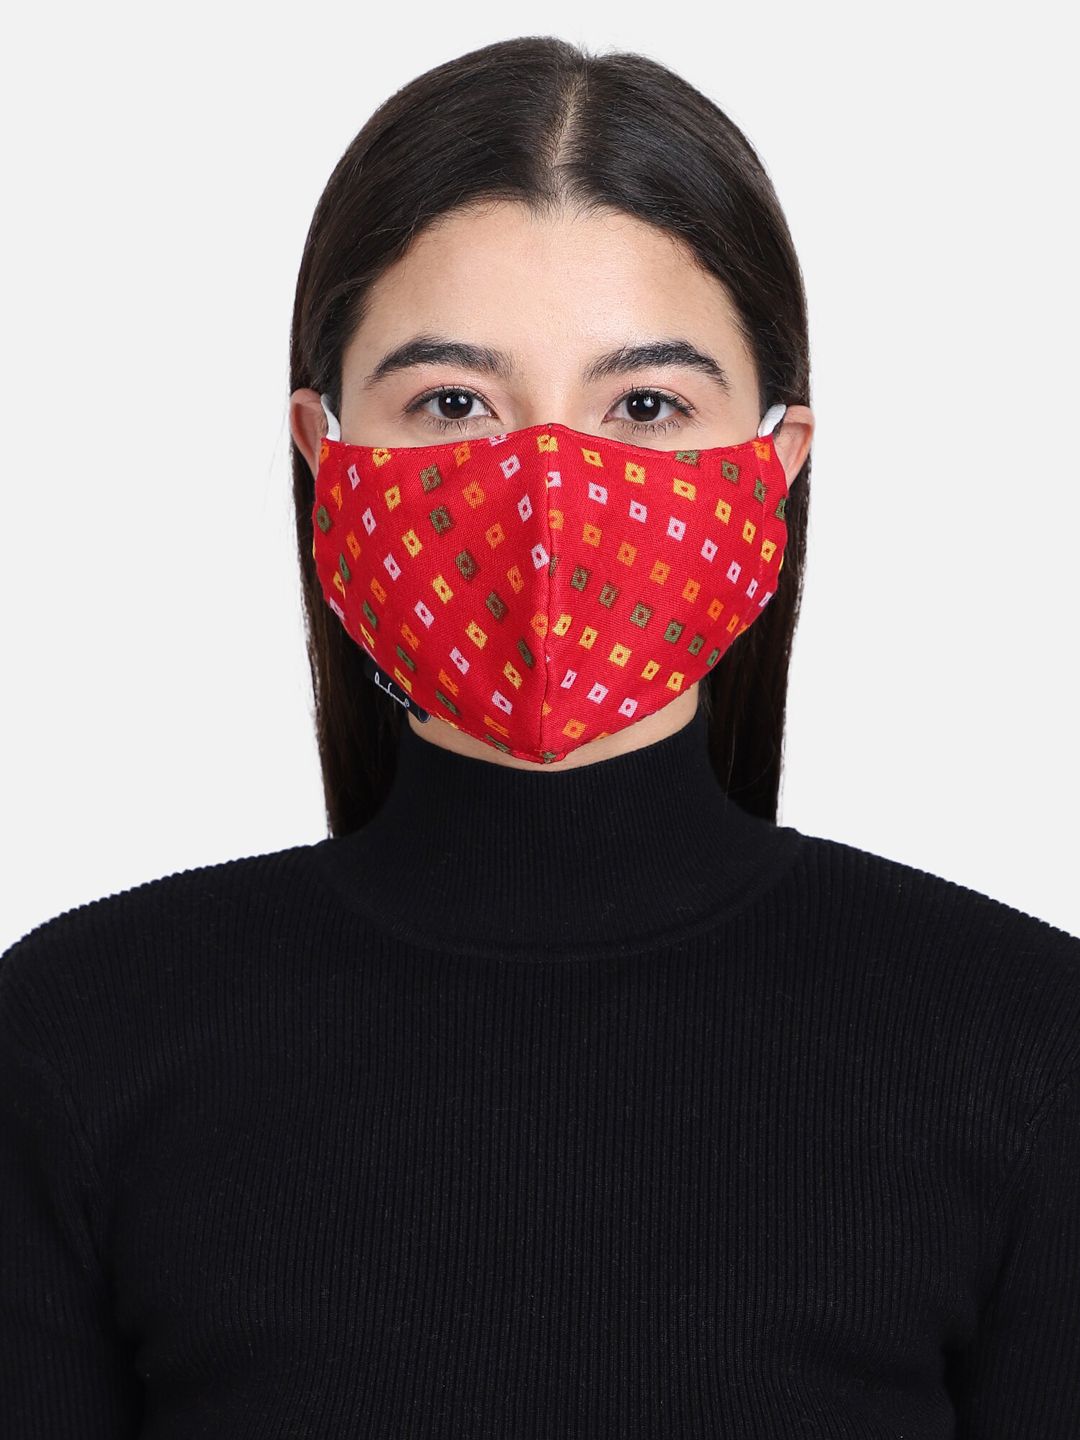 Anekaant Unisex Red & White Printed 3-Ply Reusable Cloth Mask Price in India